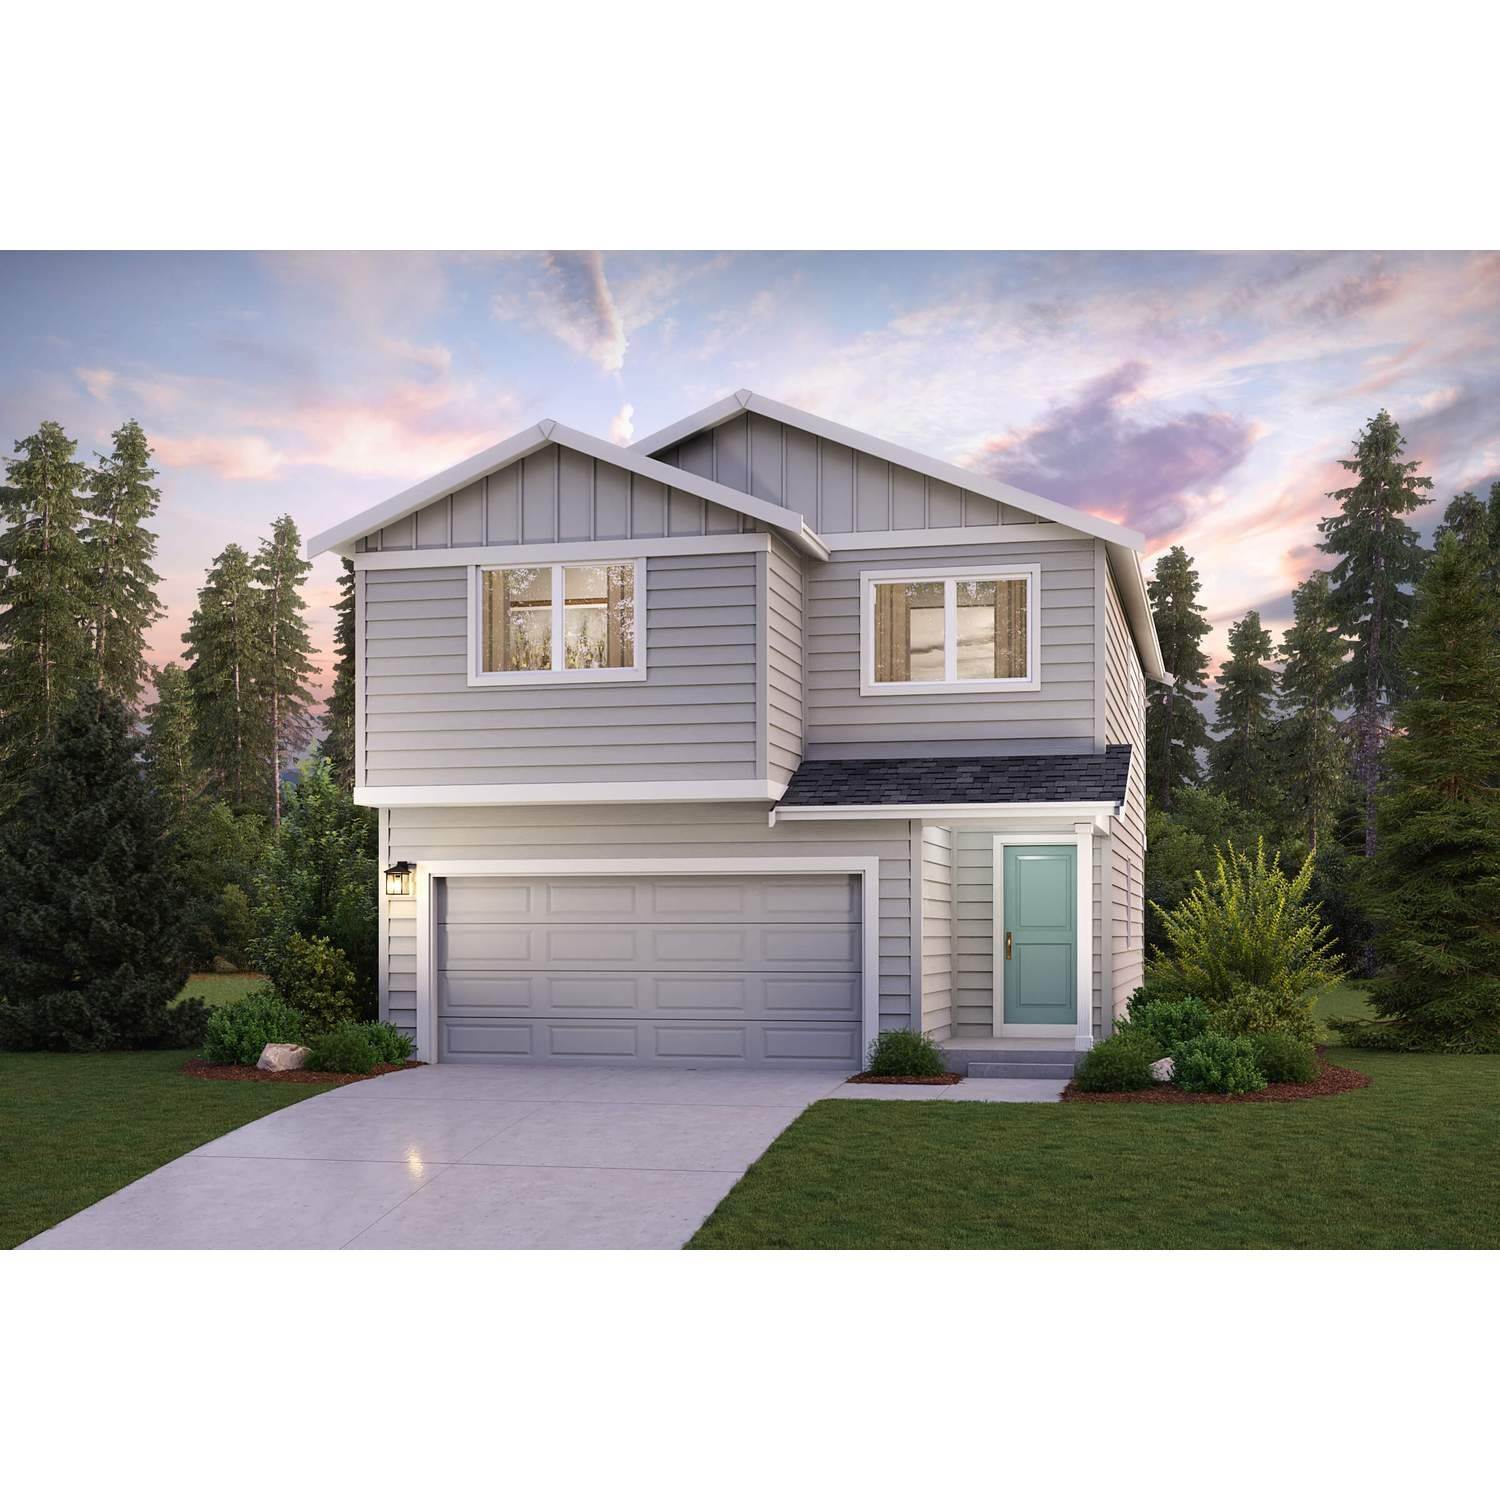 Single Family for Sale at Yelm, WA 98597